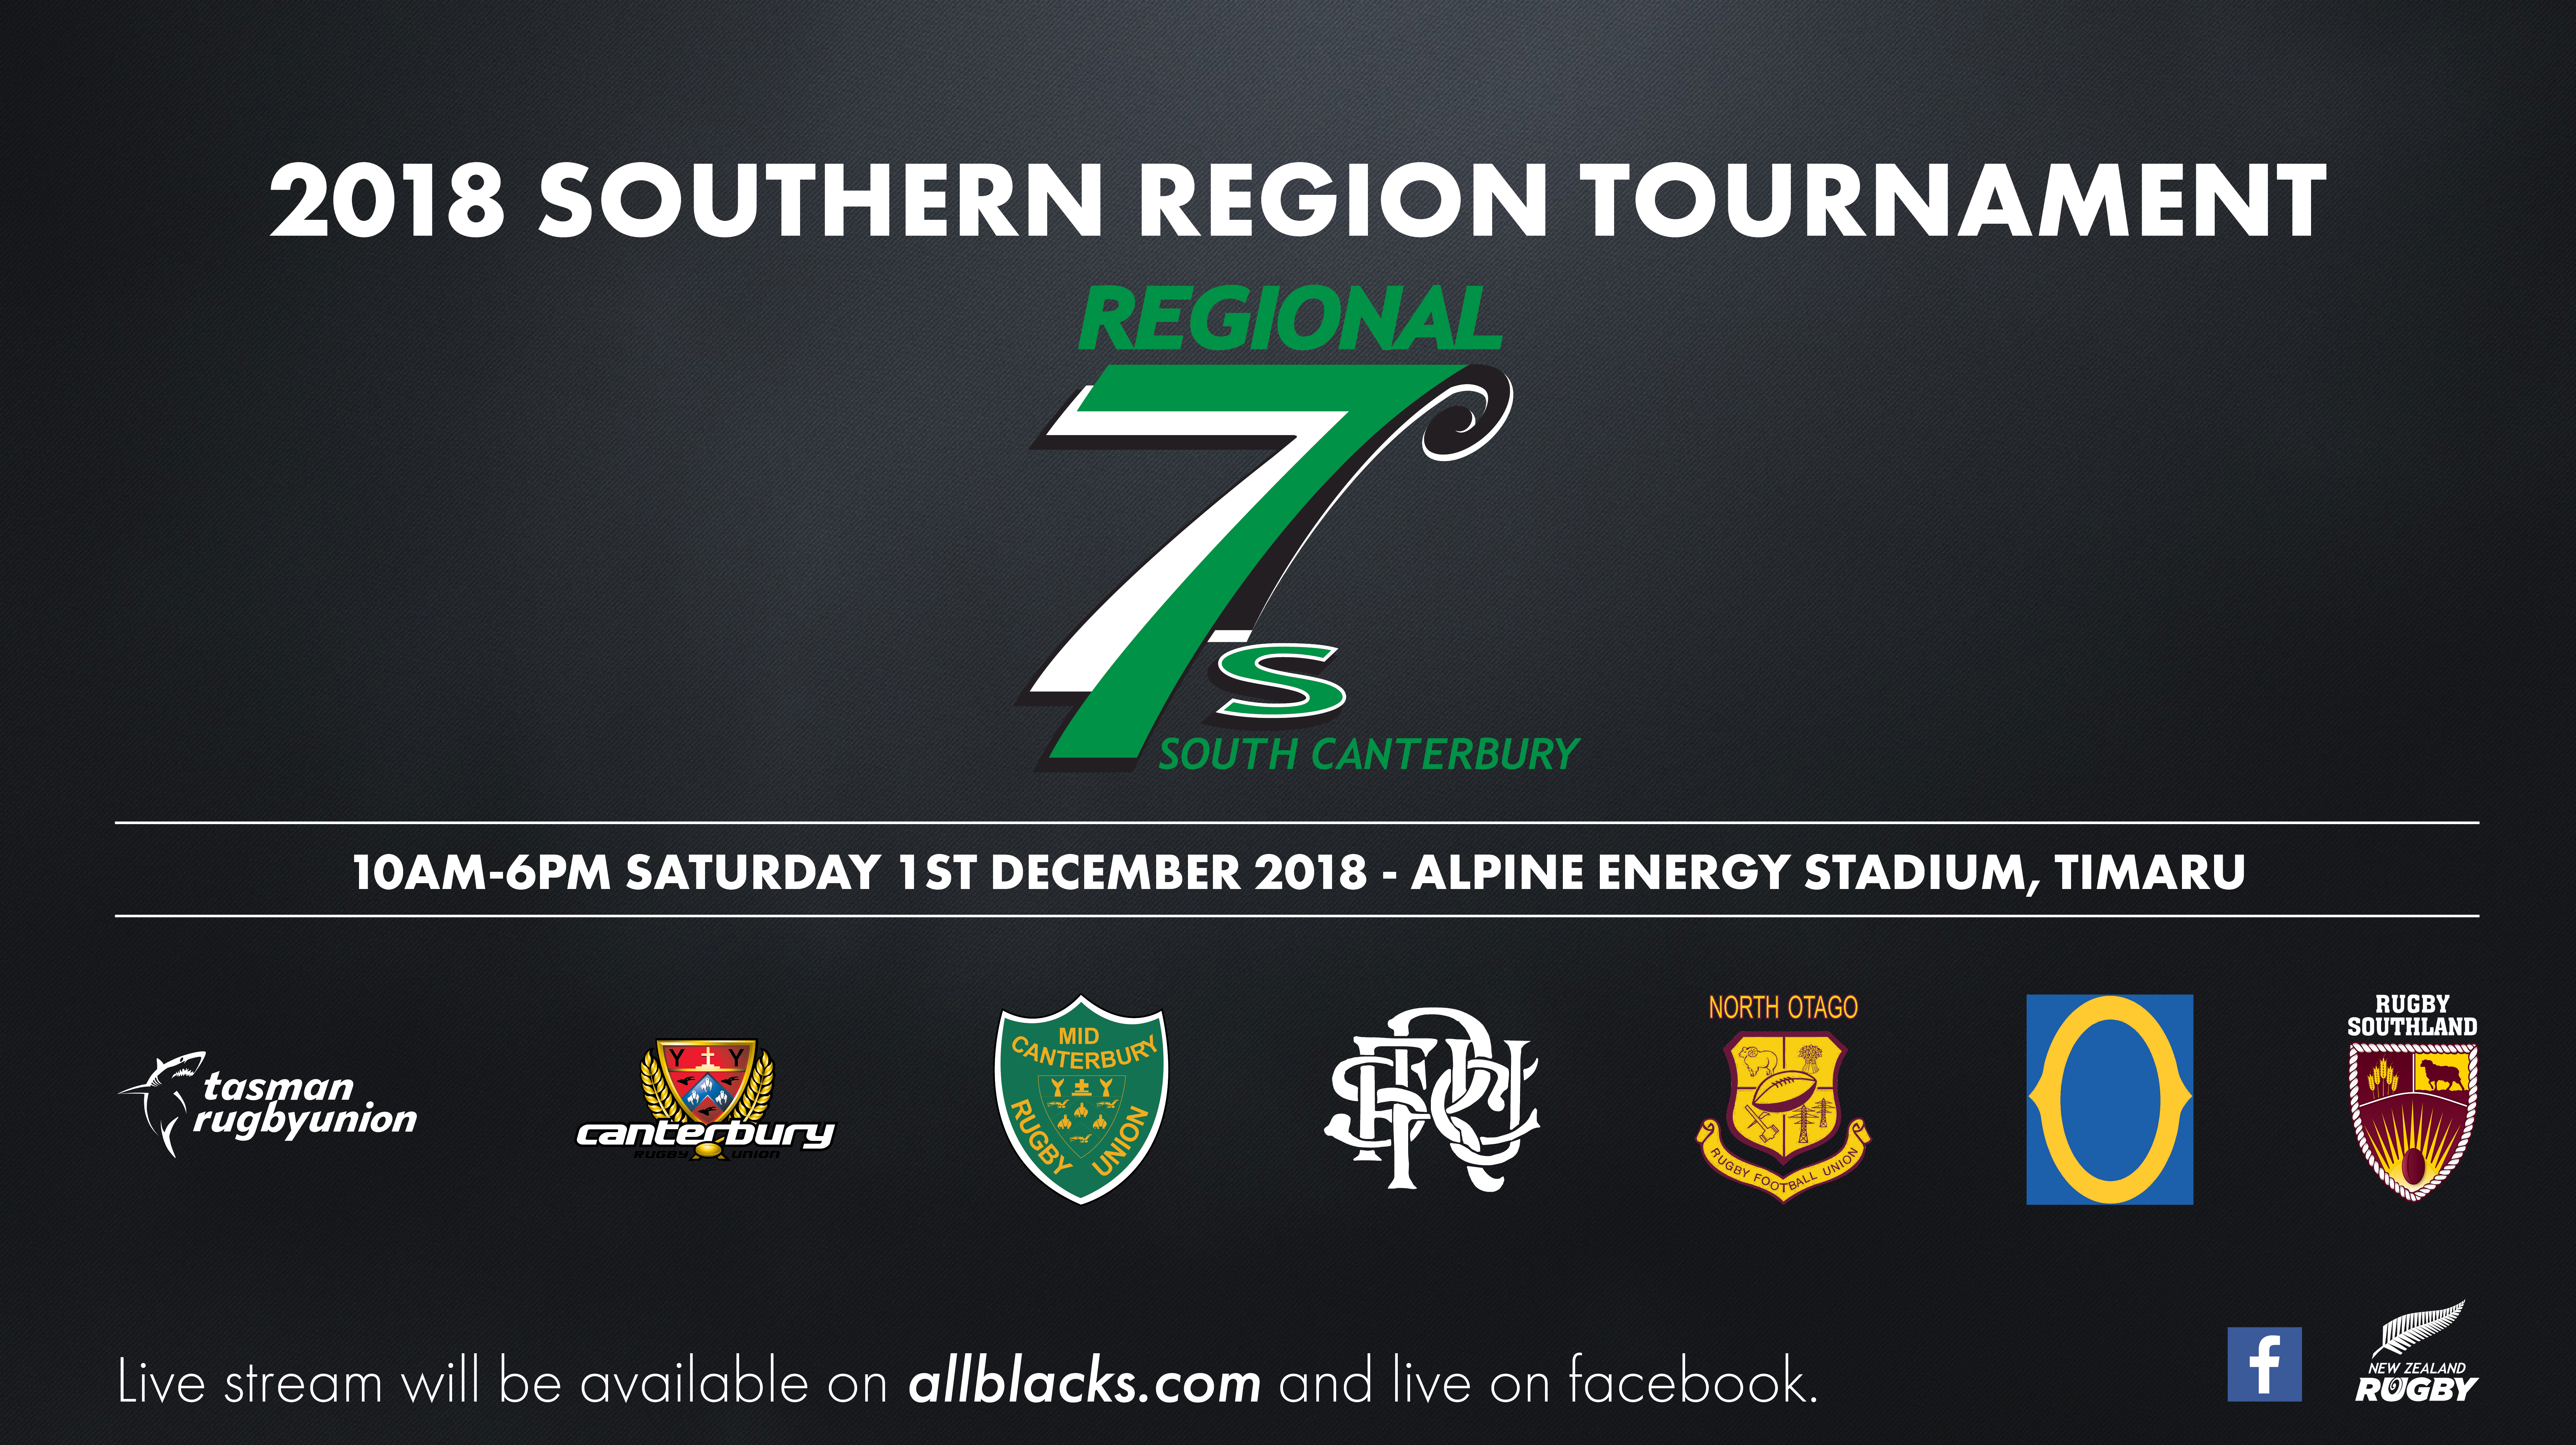 Rugby - Regional 7s